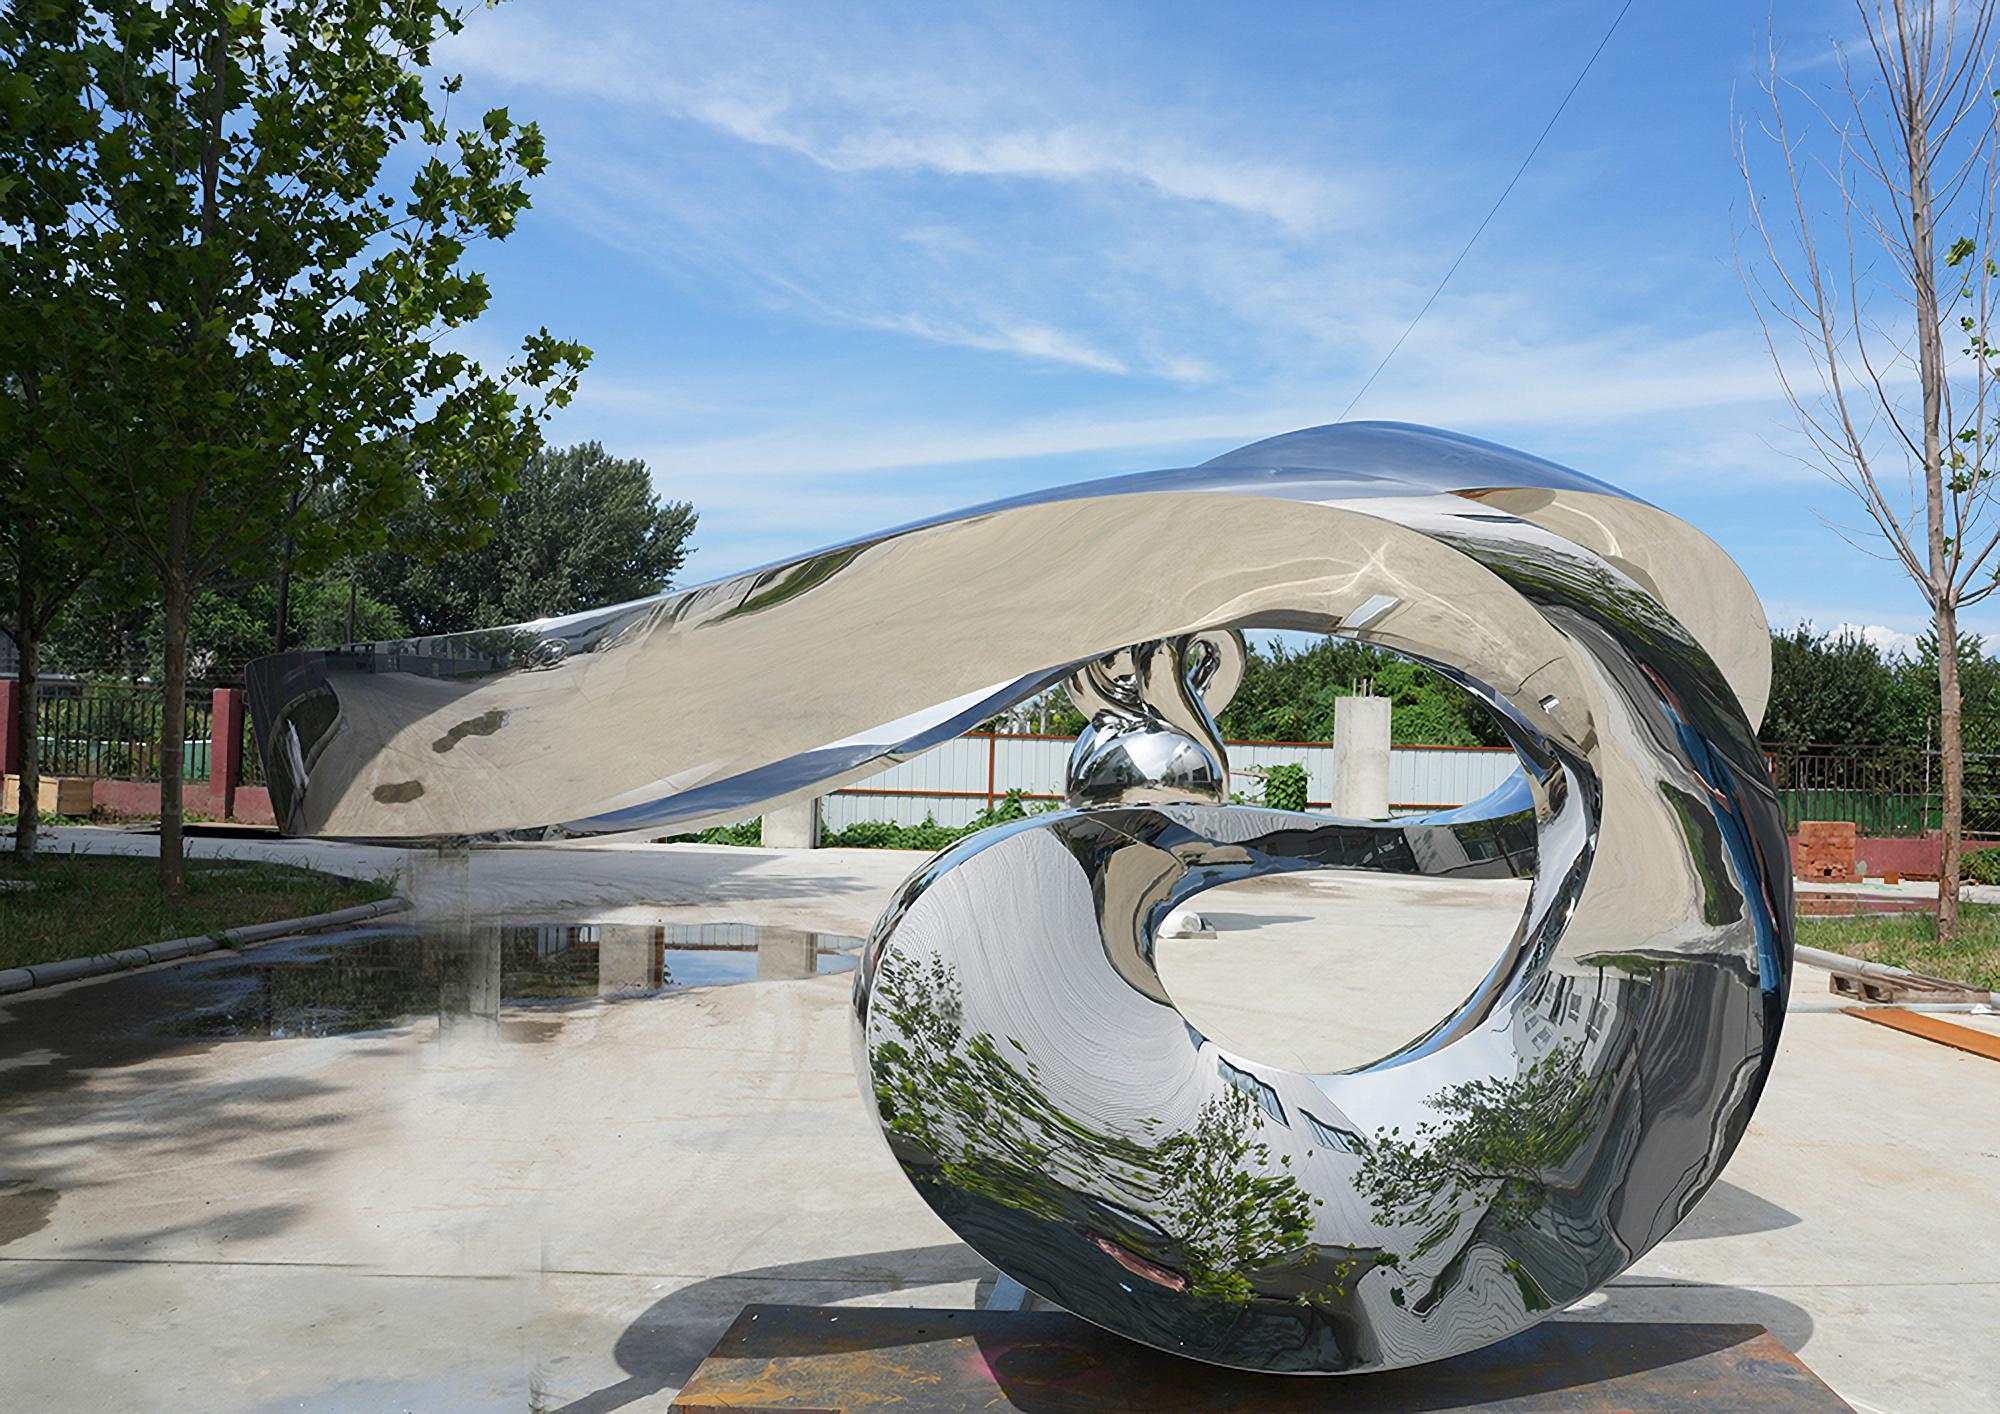 Zephyr 7ft SS - large, abstract, polished stainless steel outdoor sculpture - Contemporary Sculpture by Jeremy Guy